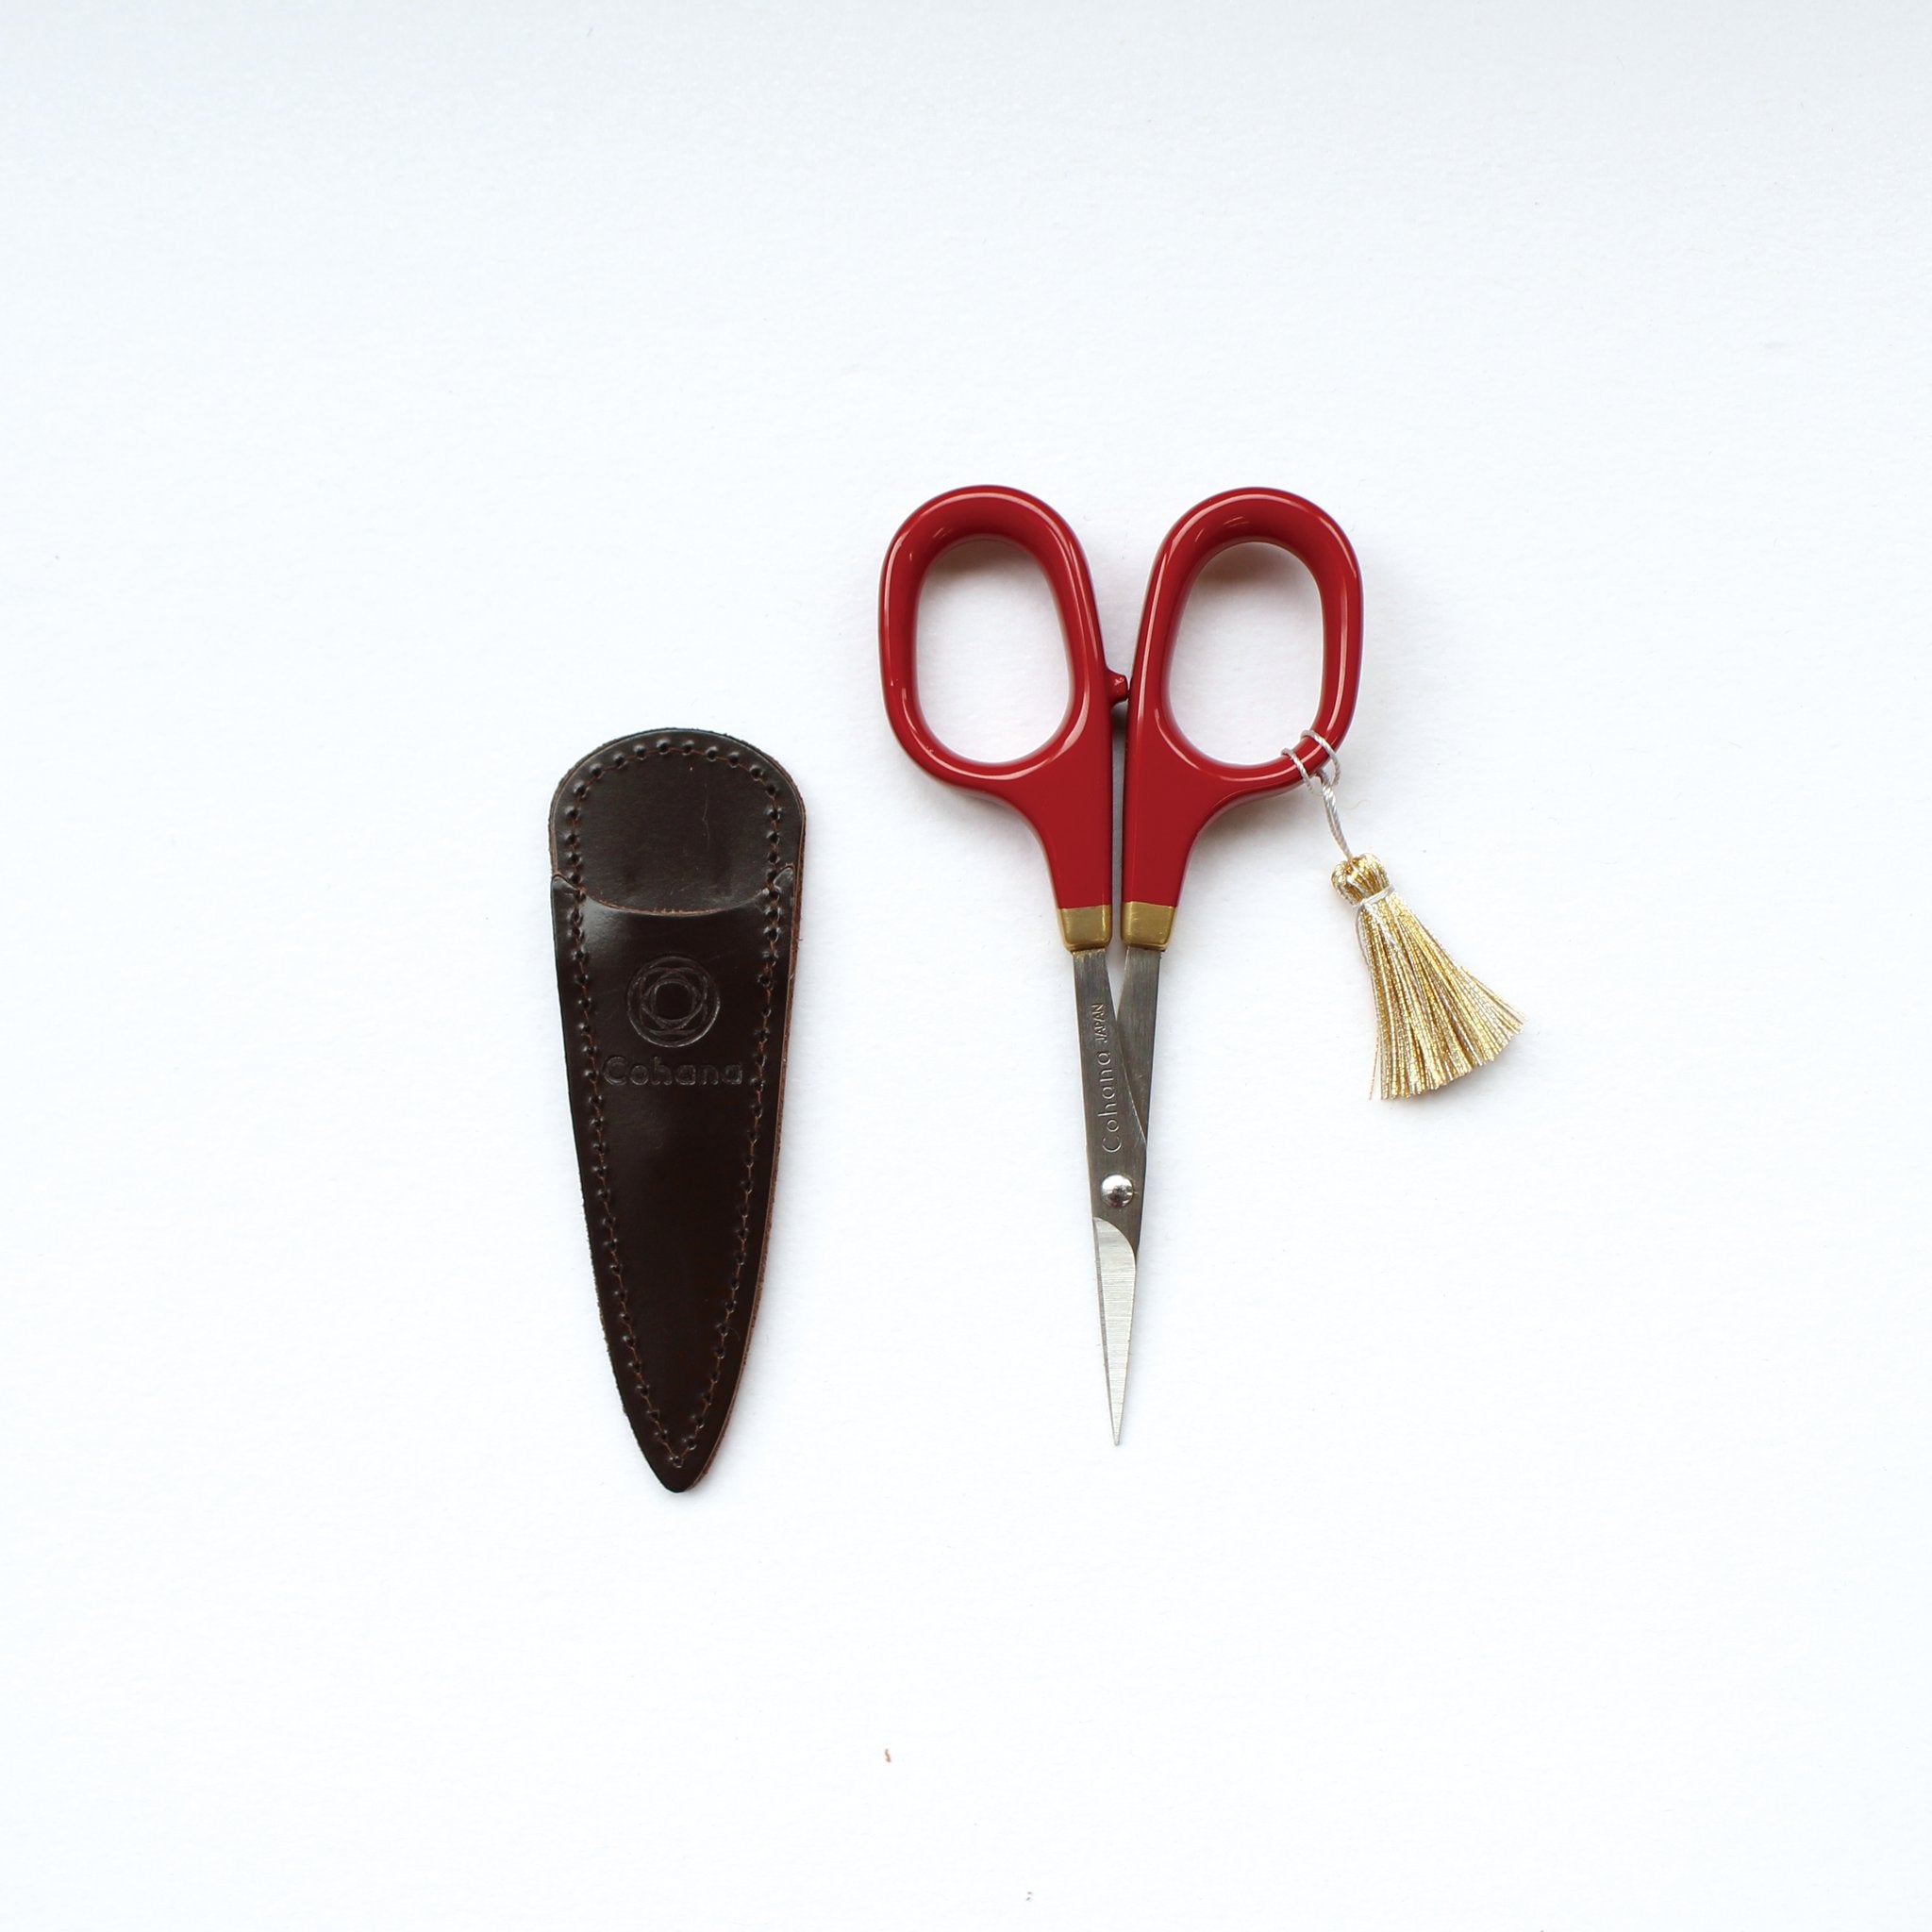 Cohana Small scissors with gold lacquer art